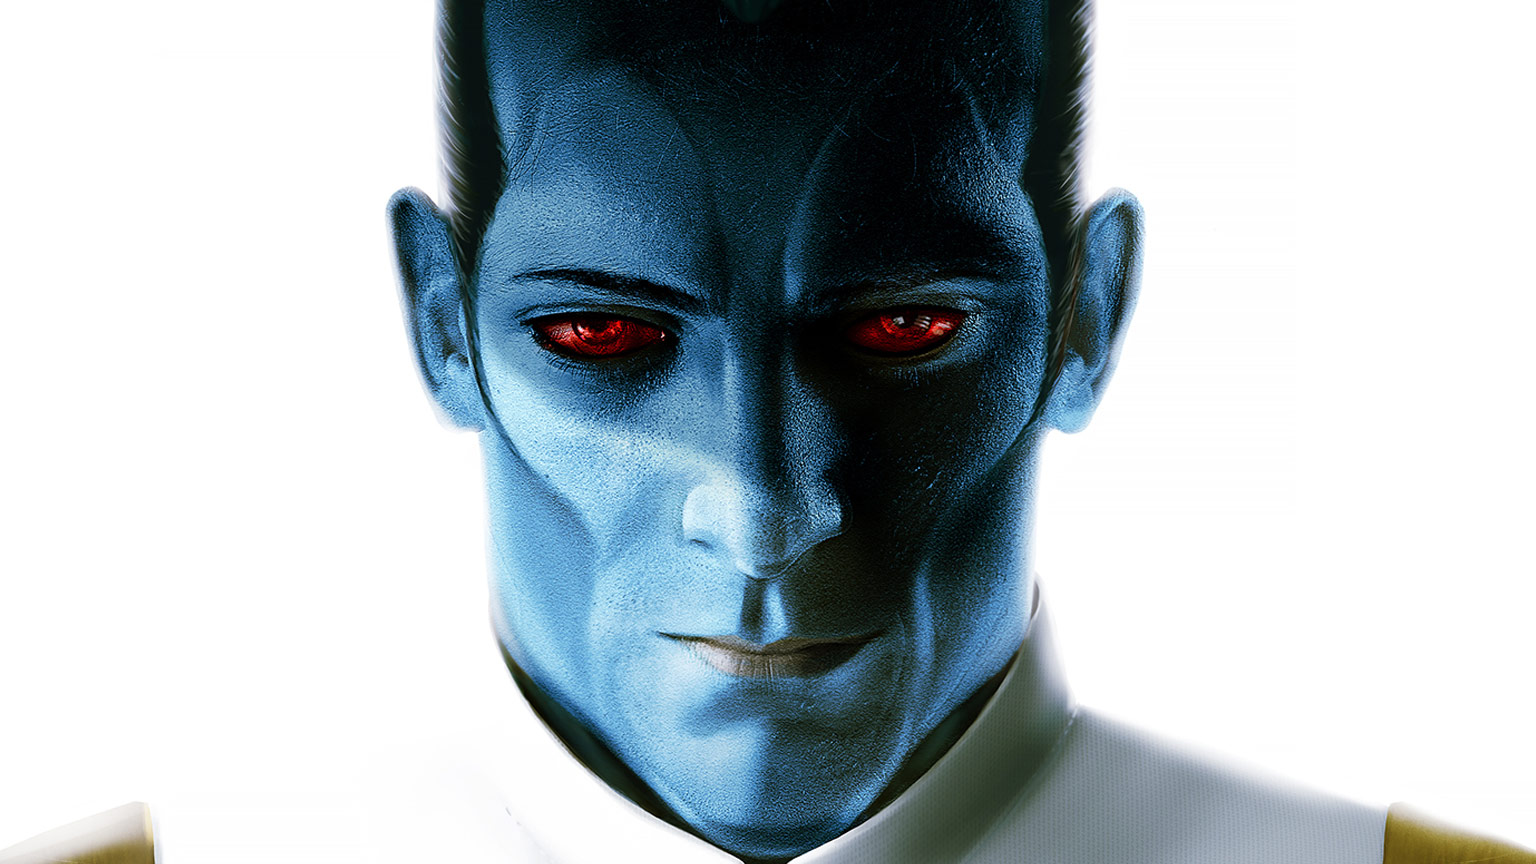 Thrawn is where justice meets mercy and crushes it unsentimentally